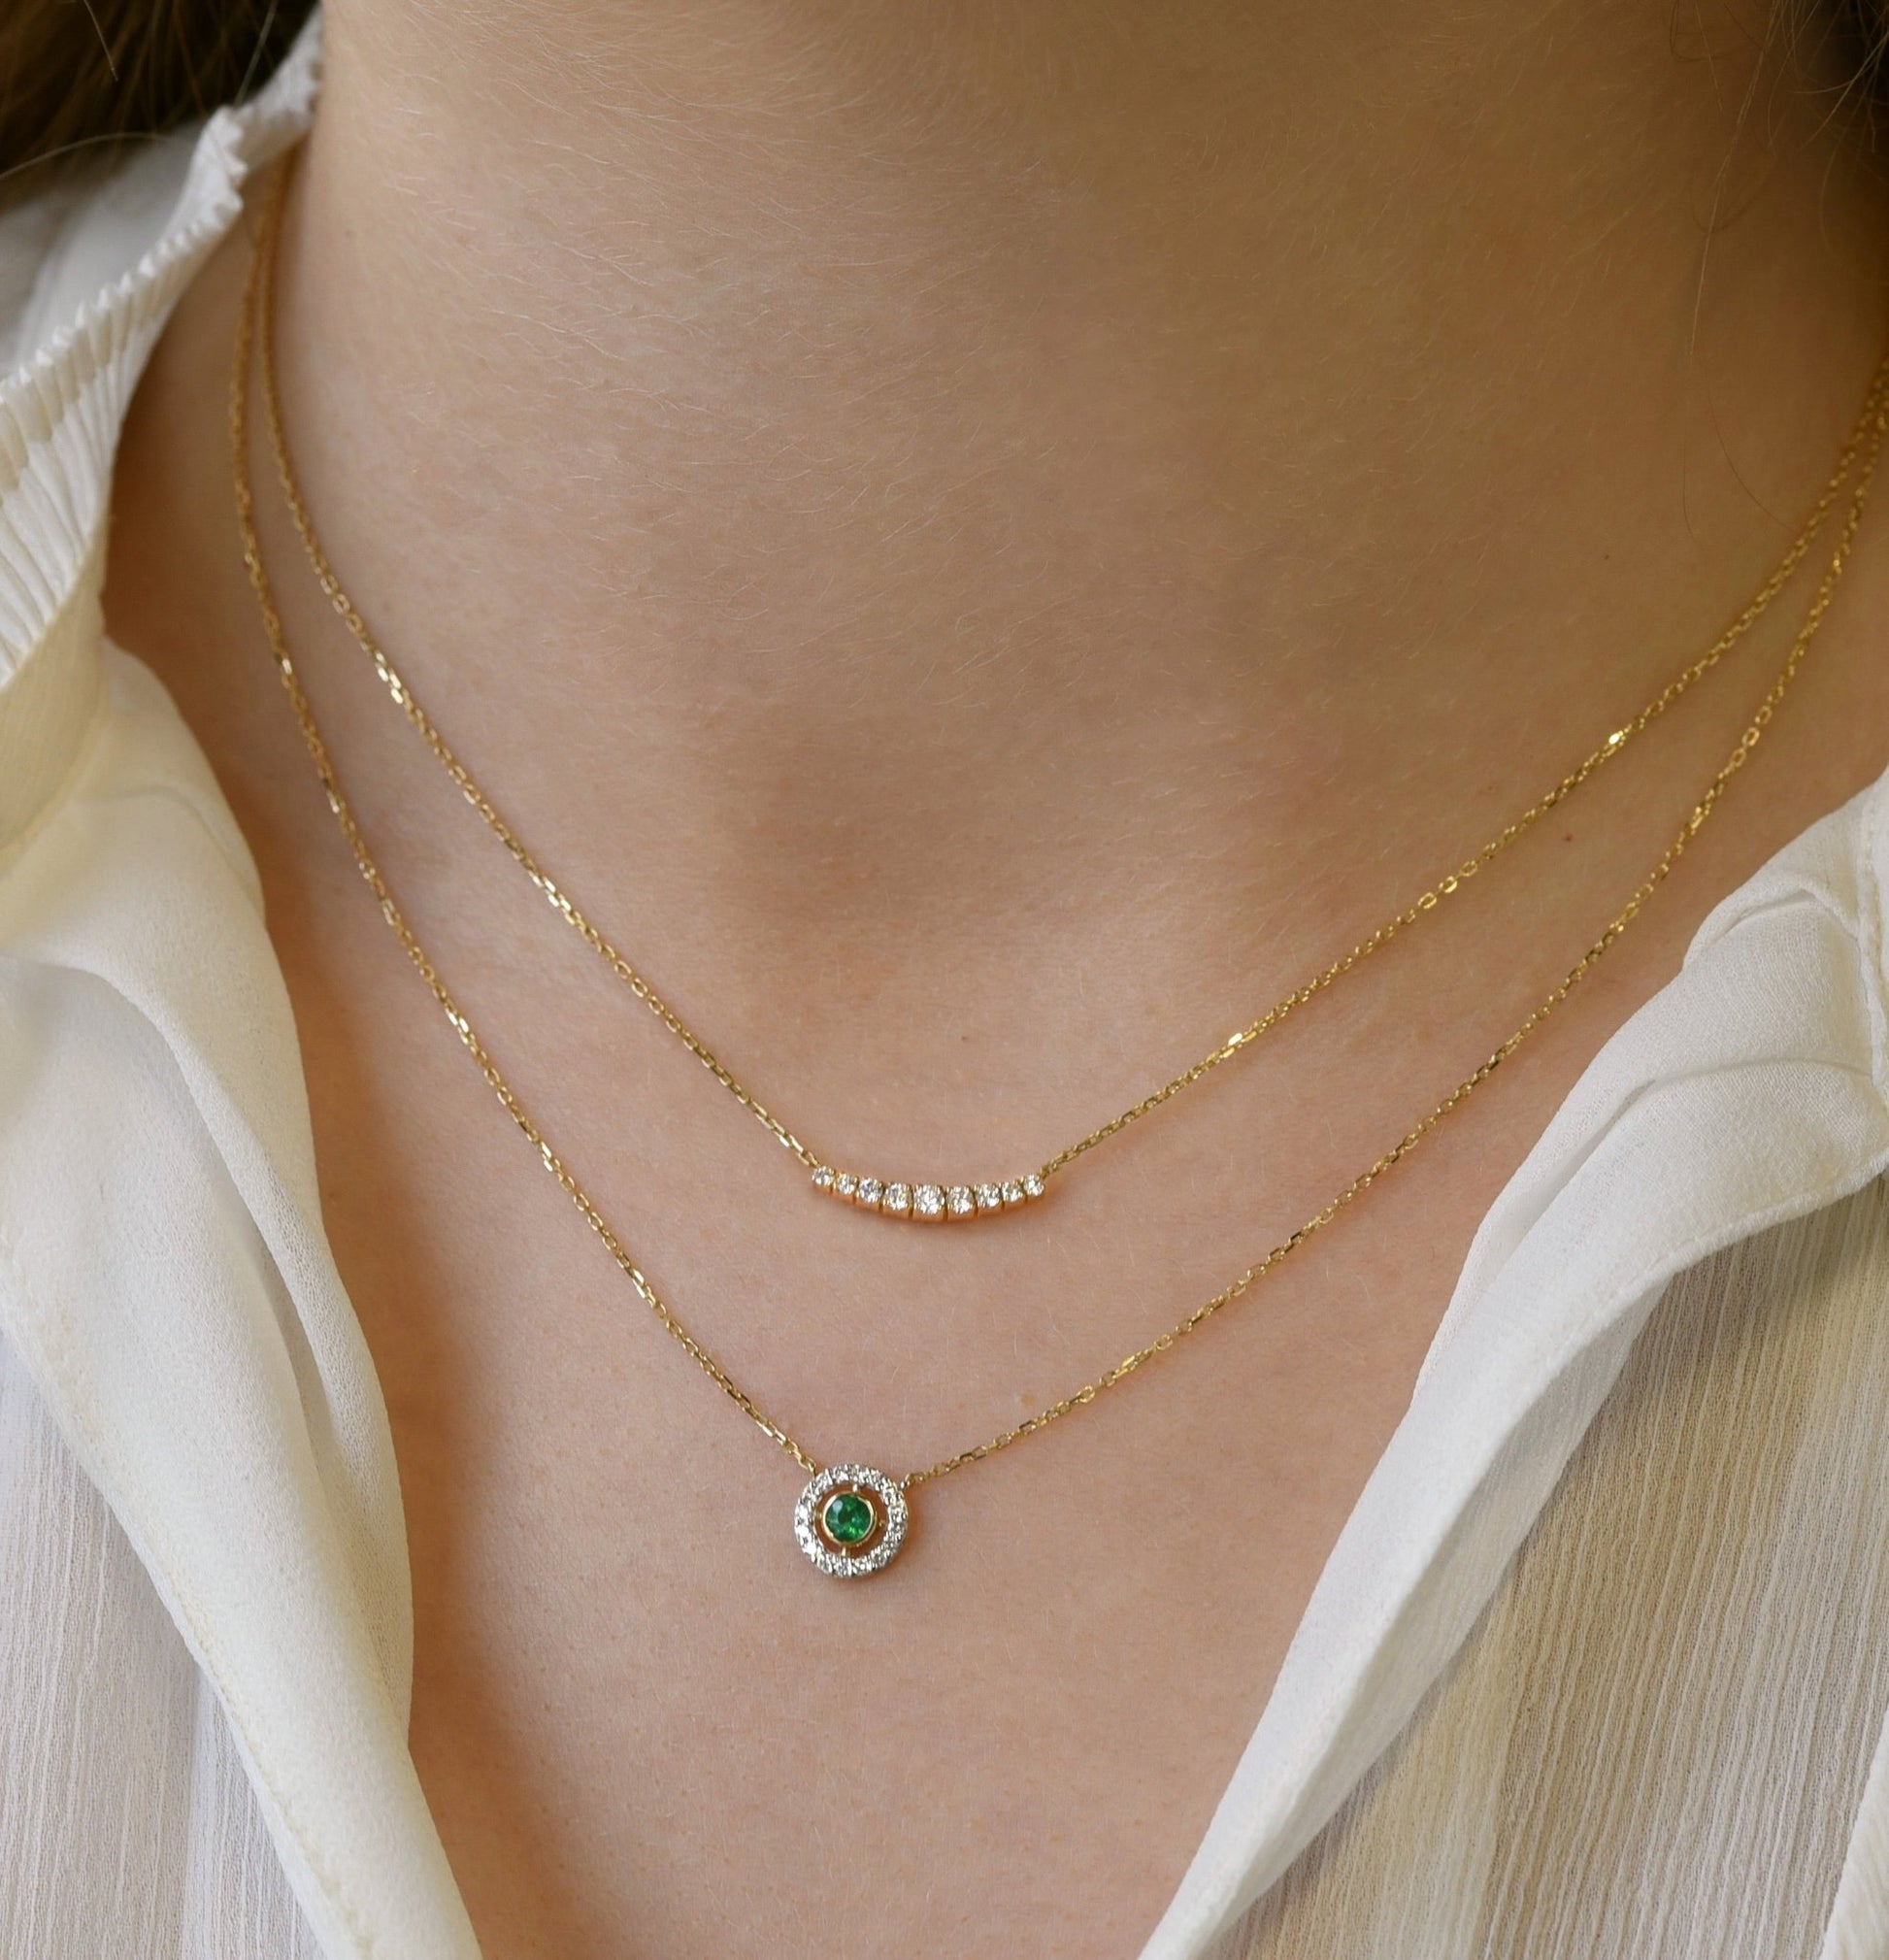 Yona Necklace in Diamond & Emerald - 18k Gold - Lynor